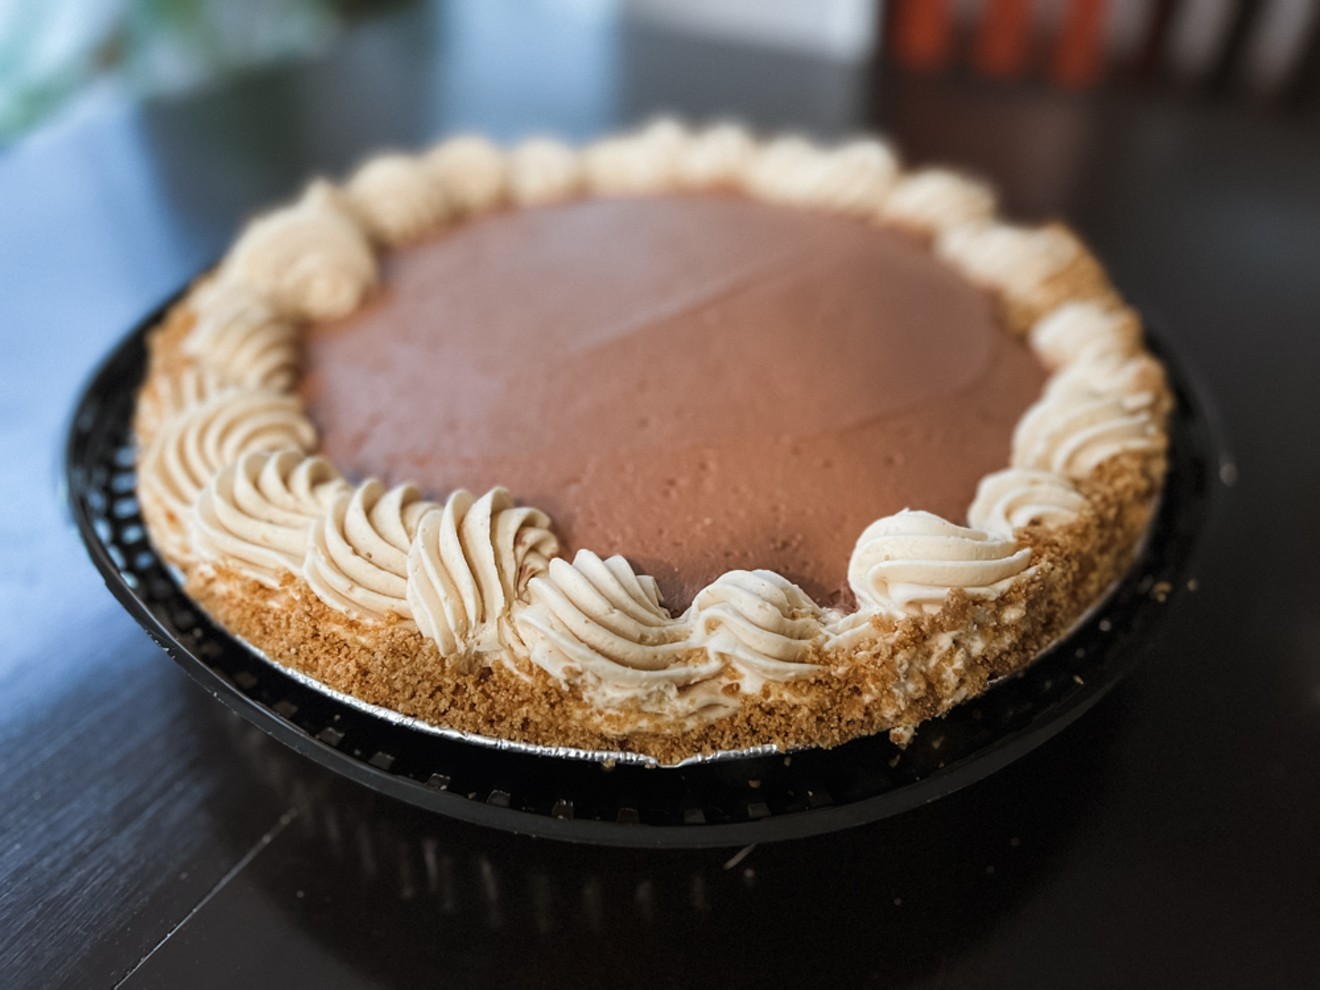 Five pounds of chocolate and peanut butter cream pie has the internet's collective hearts aflutter.